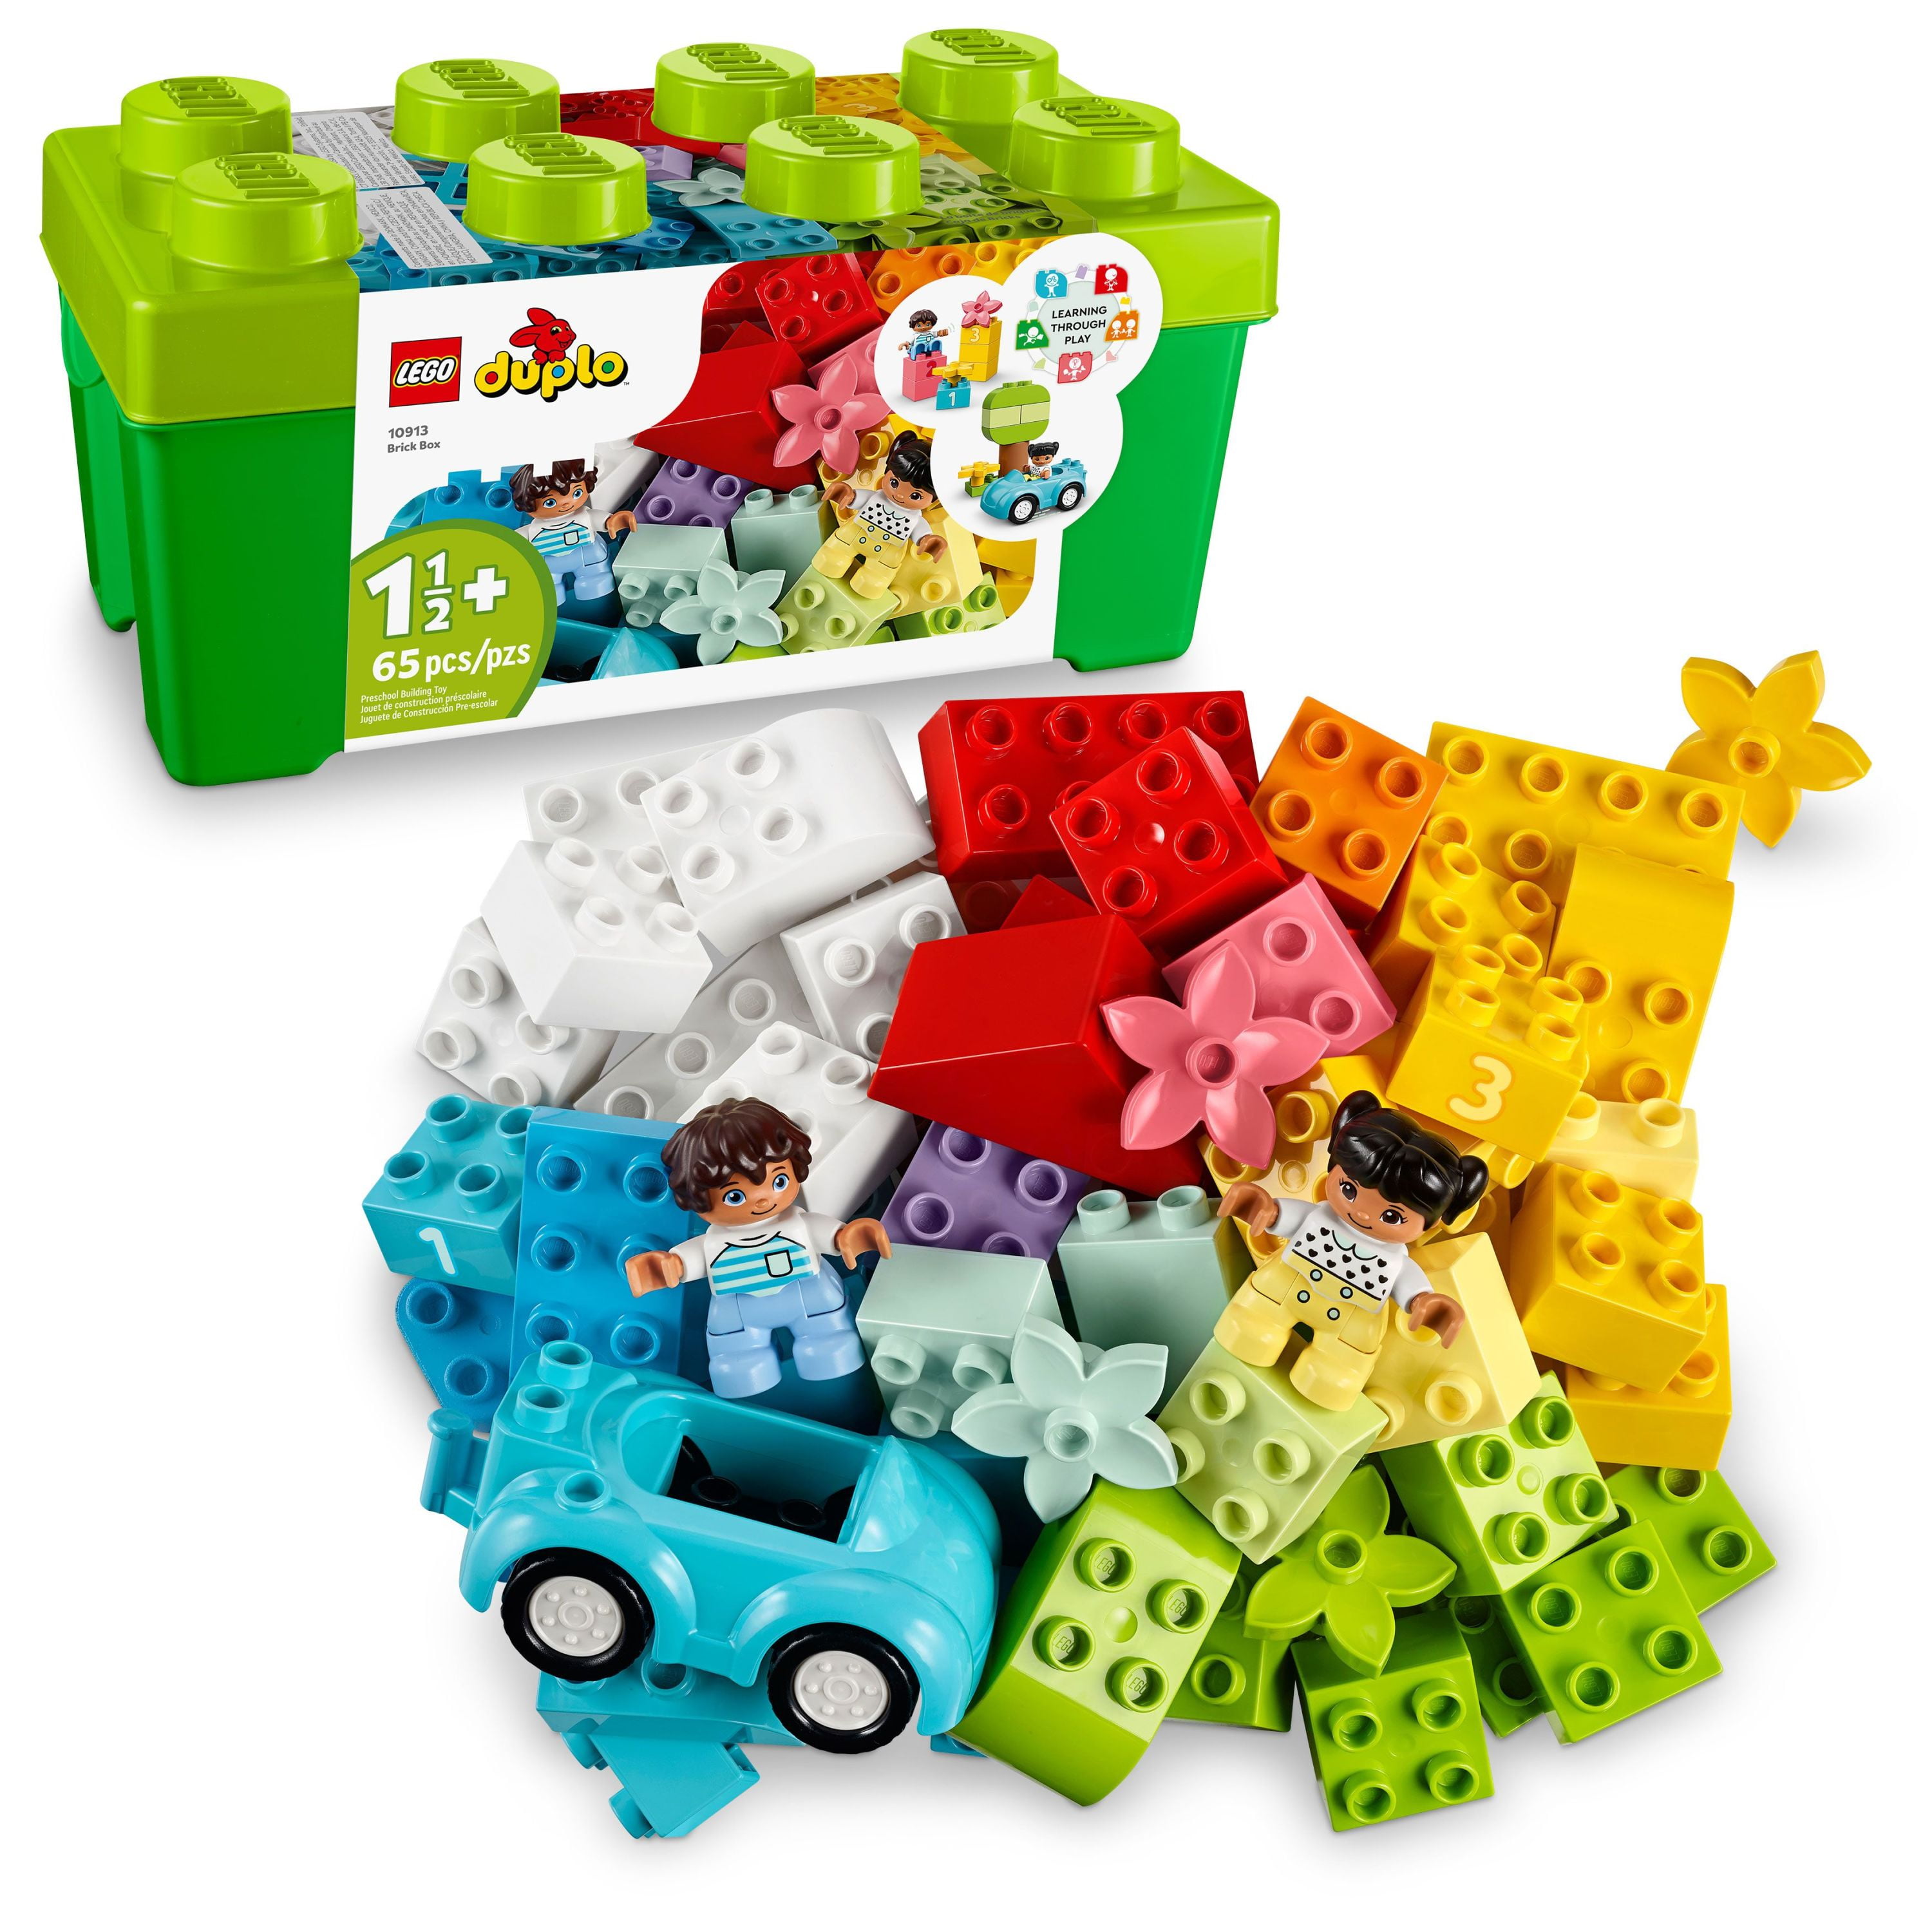 Halloween perle Merchandising LEGO DUPLO Classic Brick Box Building Set with Storage 10913, Toy Car,  Number Bricks and More, Learning Toys for Toddlers, Boys & Girls 18 Months  Old - Walmart.com